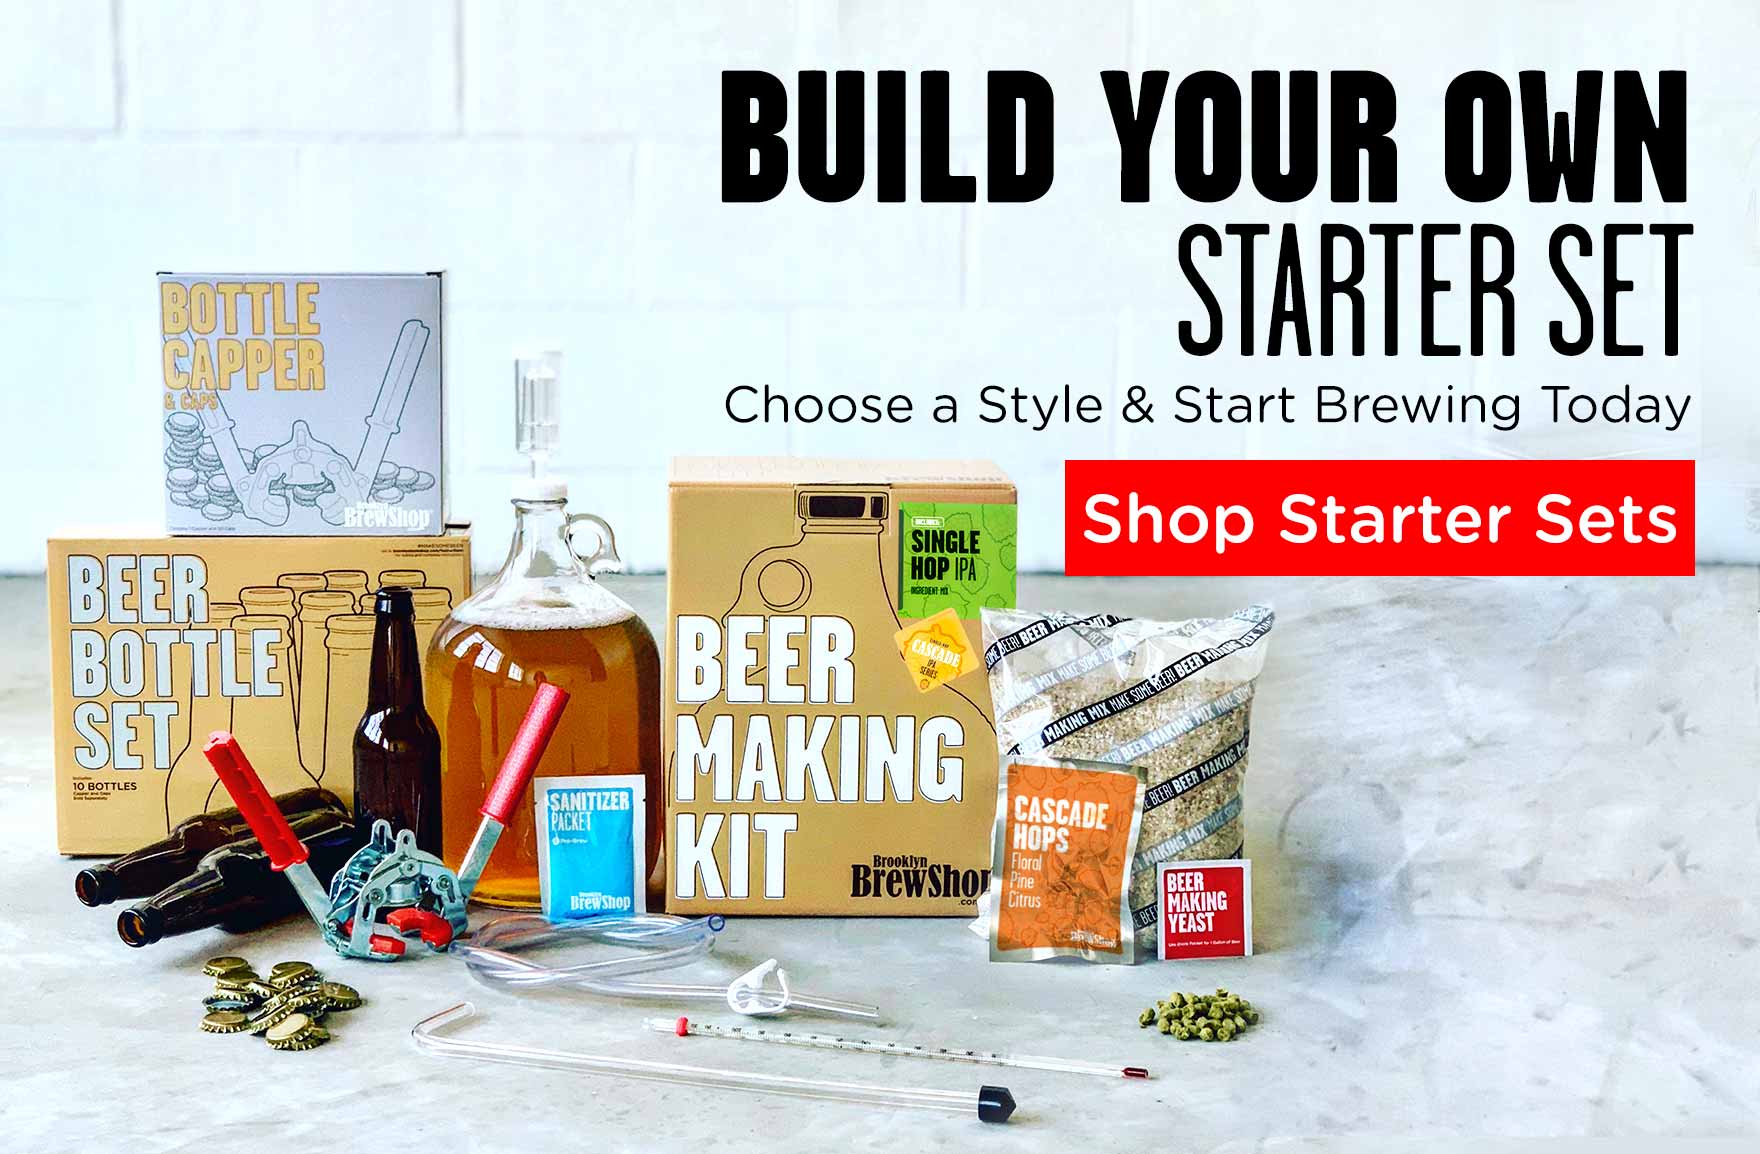 Build Your Own Starter Set and Start Brewing Today.